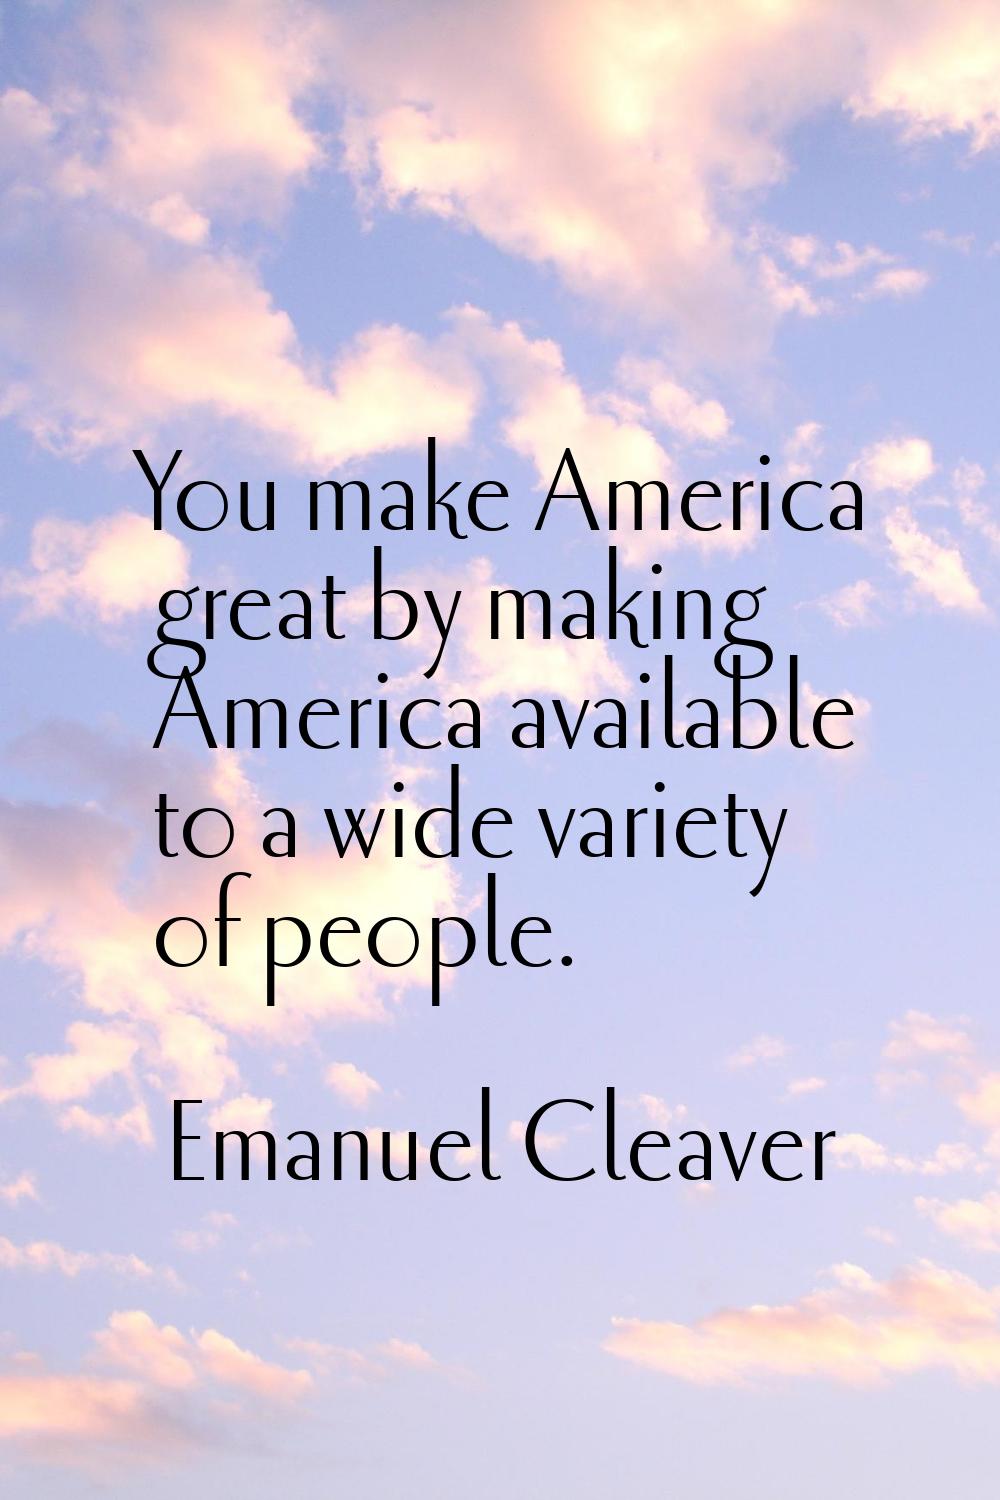 You make America great by making America available to a wide variety of people.